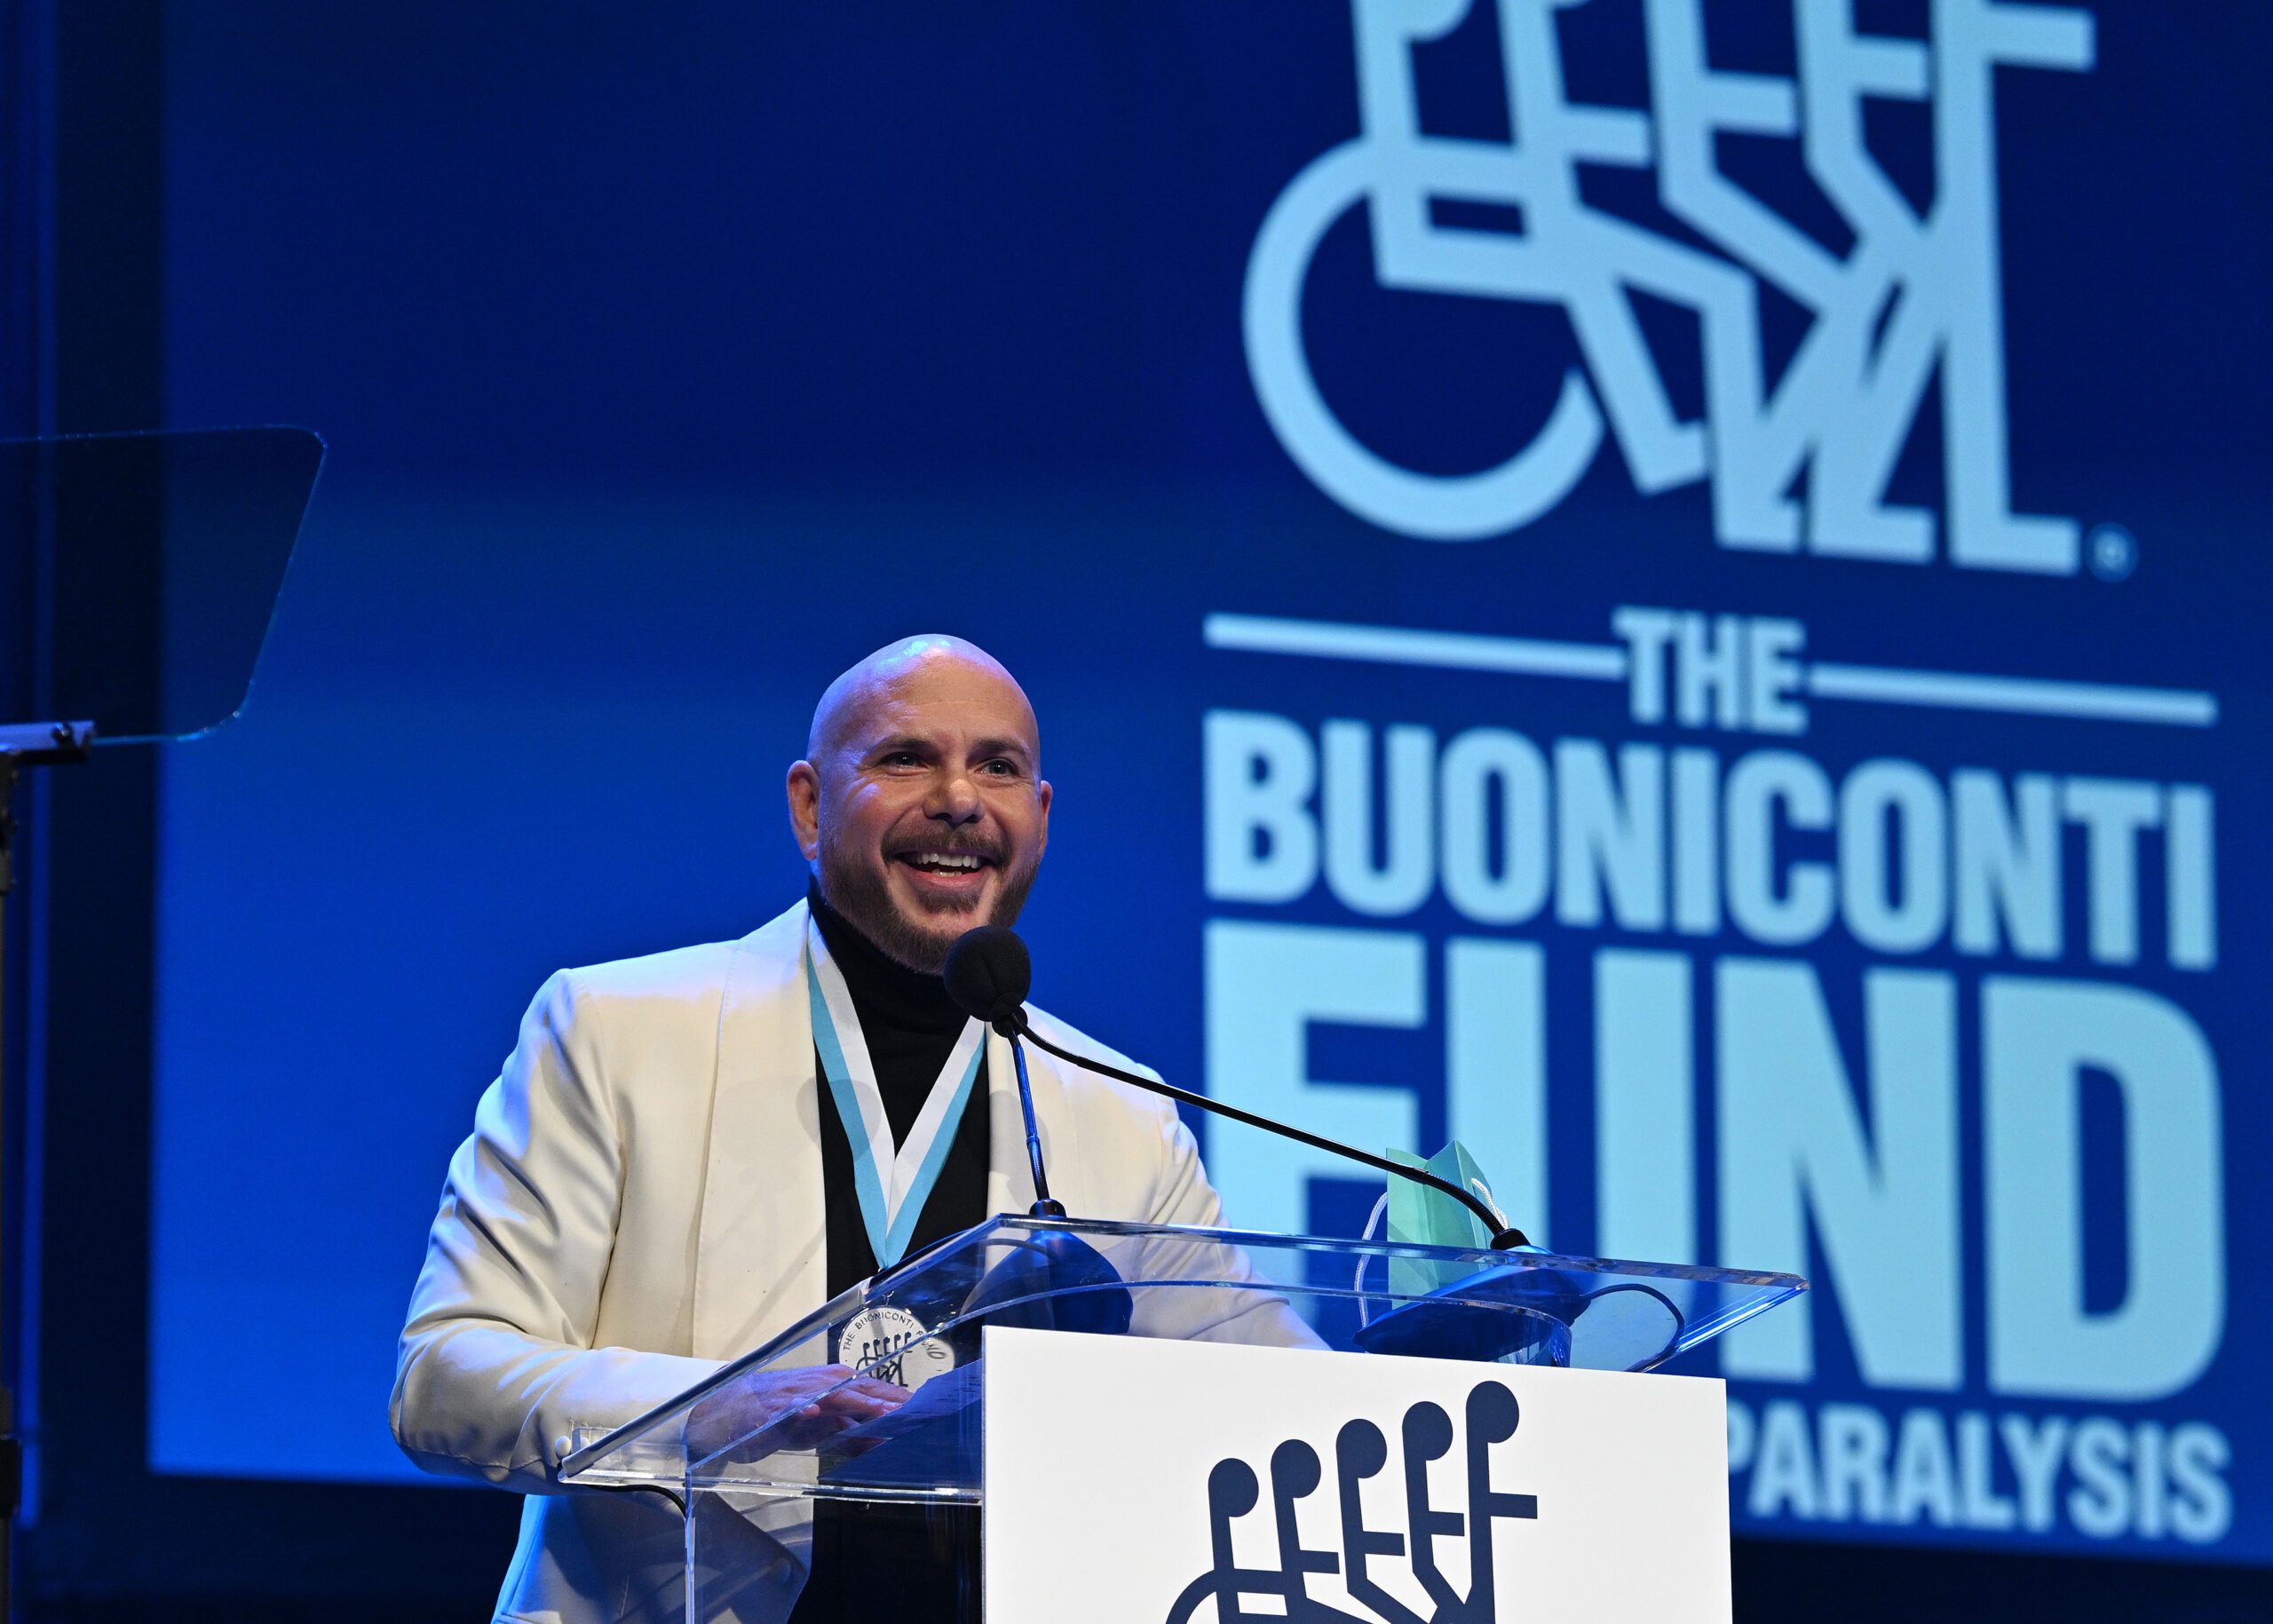 Pitbull speaks onstage Photo by Bryan Bedder/Getty Images for The Buoniconti Fund To Cure Paralysis)